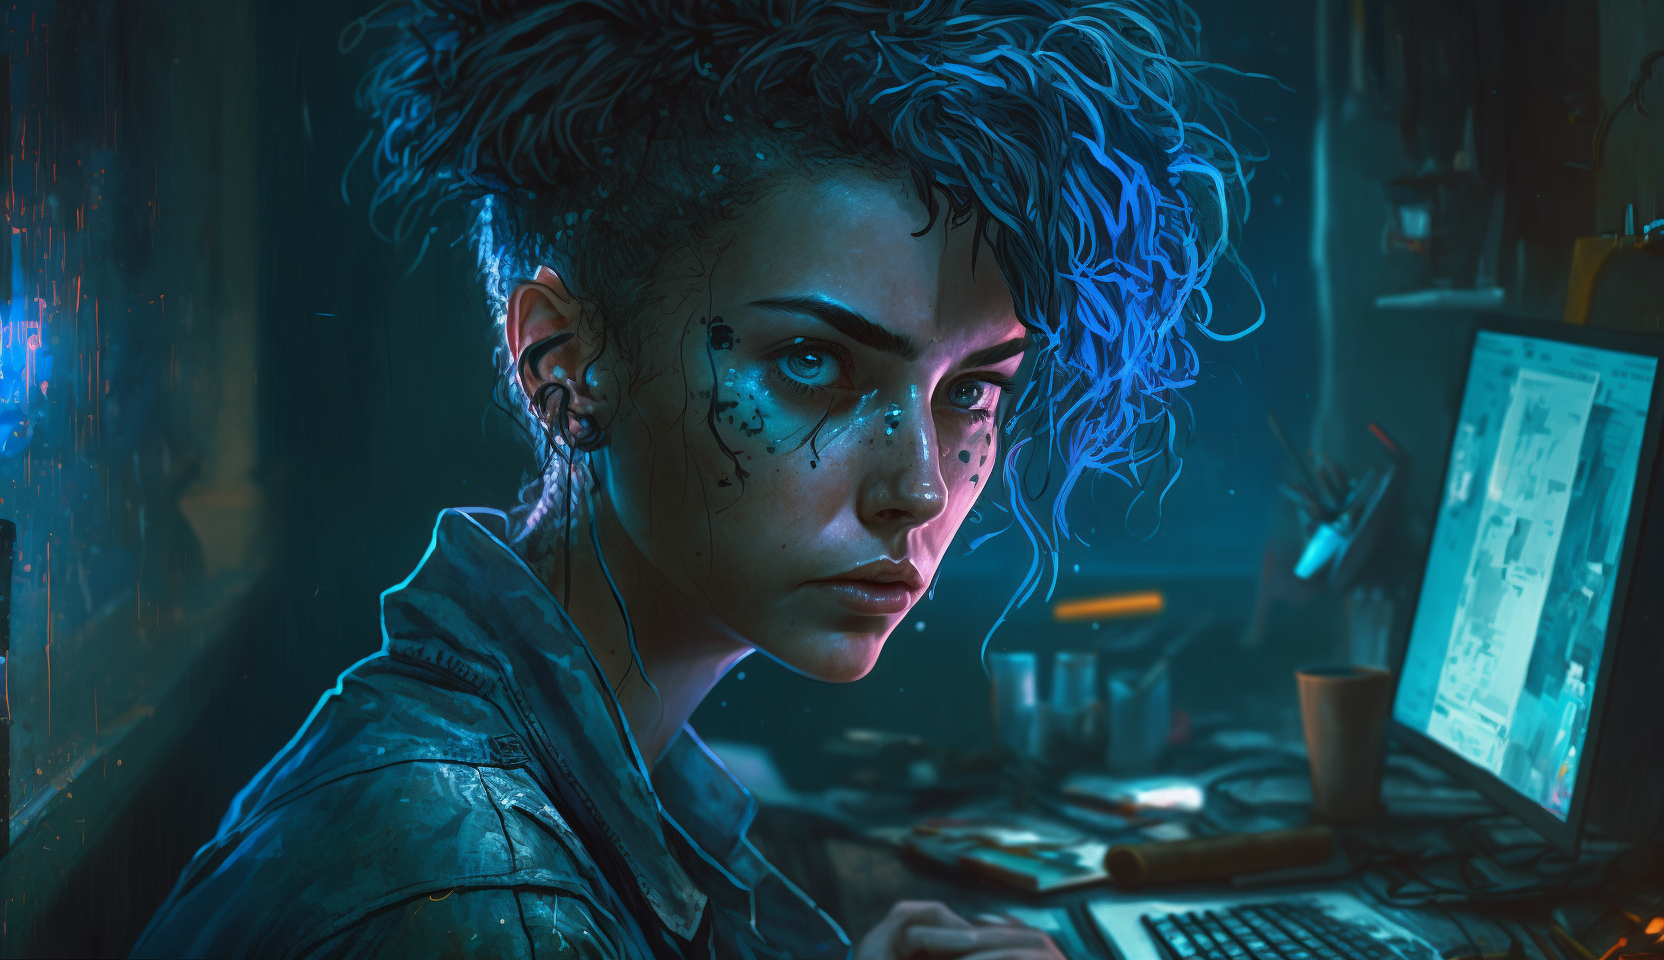 A young woman with curly blue hair sitting in the glow of a computer monitor. 